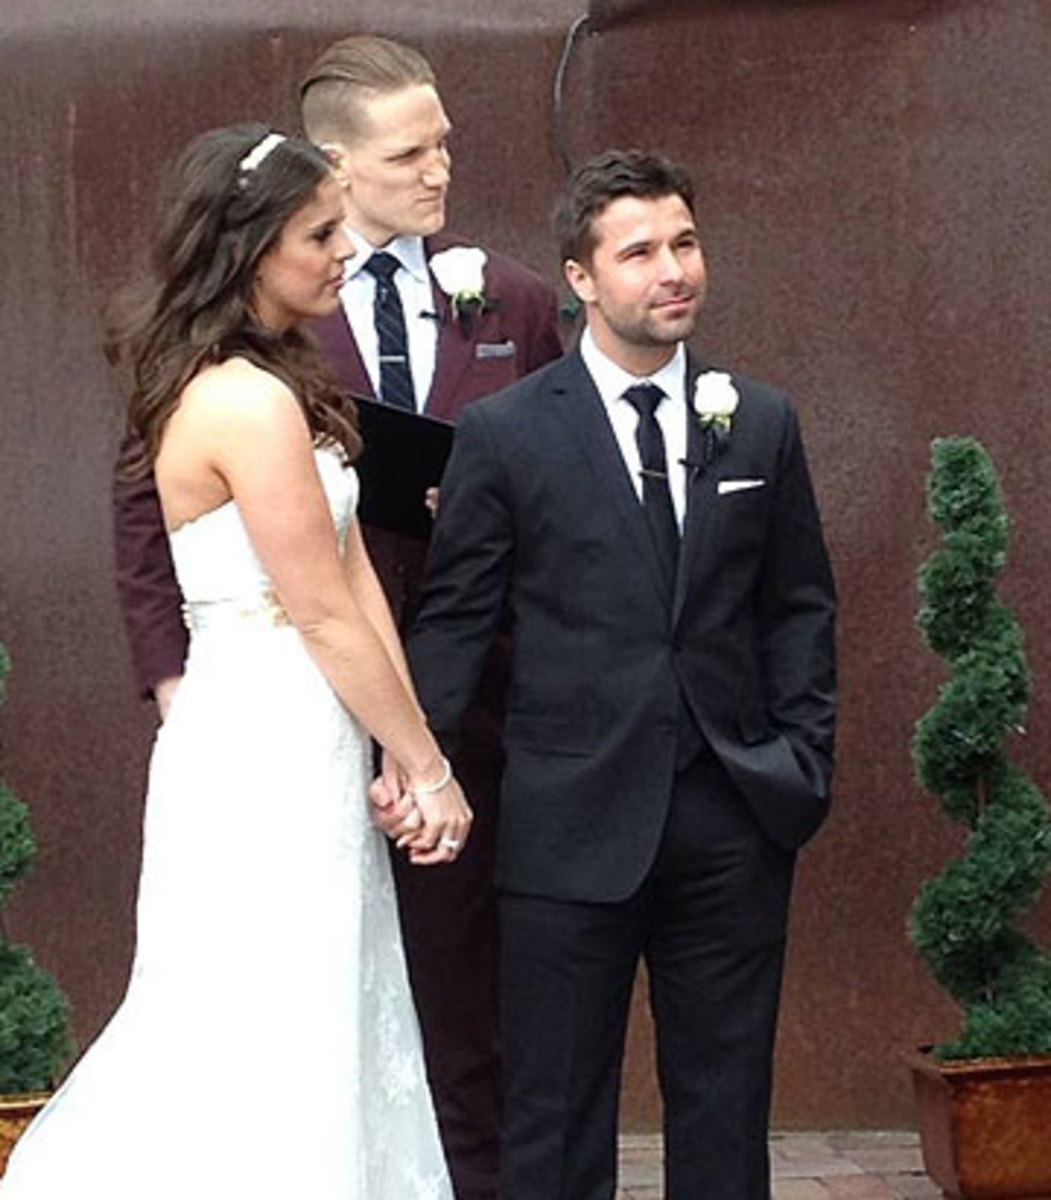 A.J. Hawk presided over the wedding of Packers trainer Nate Weir and his new wife Leslie. (Courtesy of A.J. Hawk)